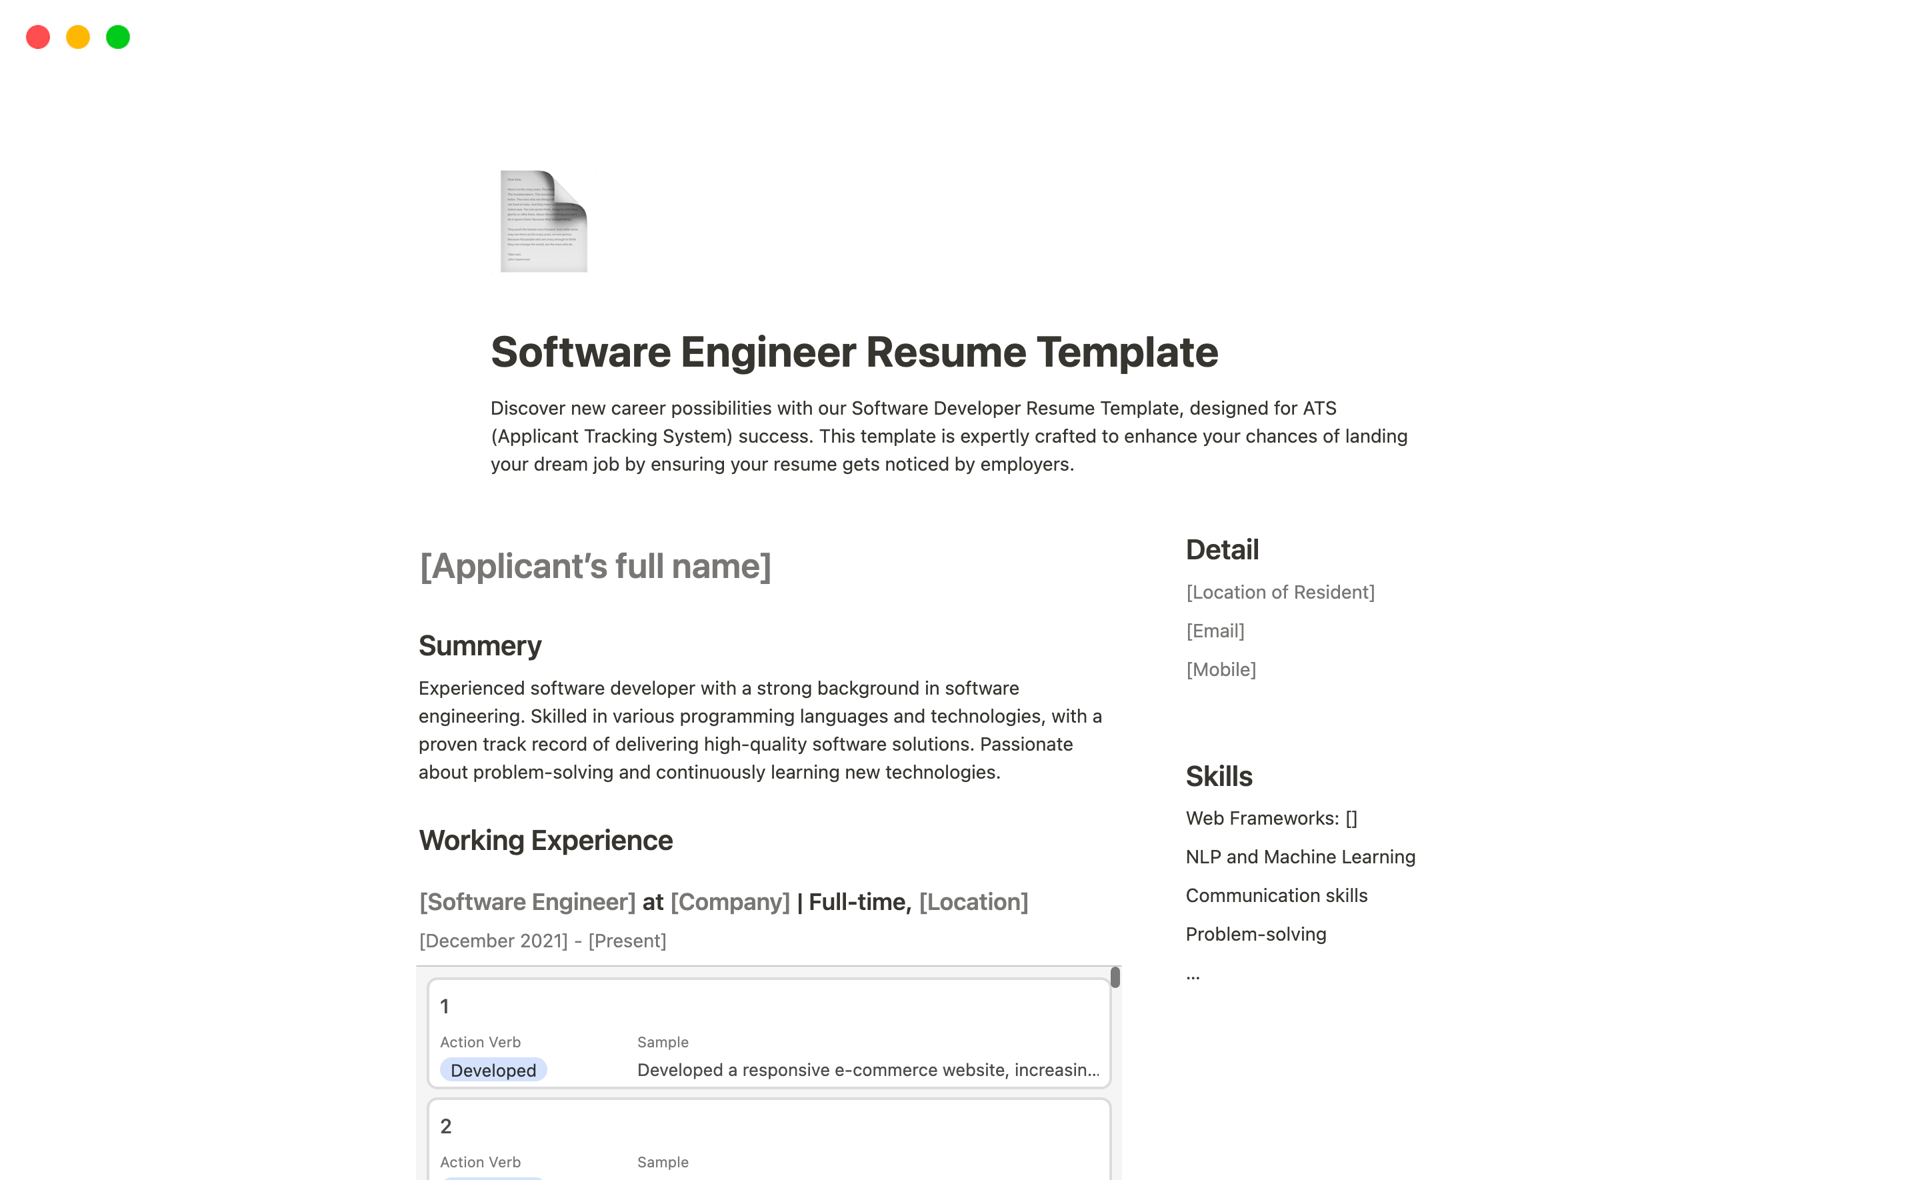 A template preview for Software Engineer Resume